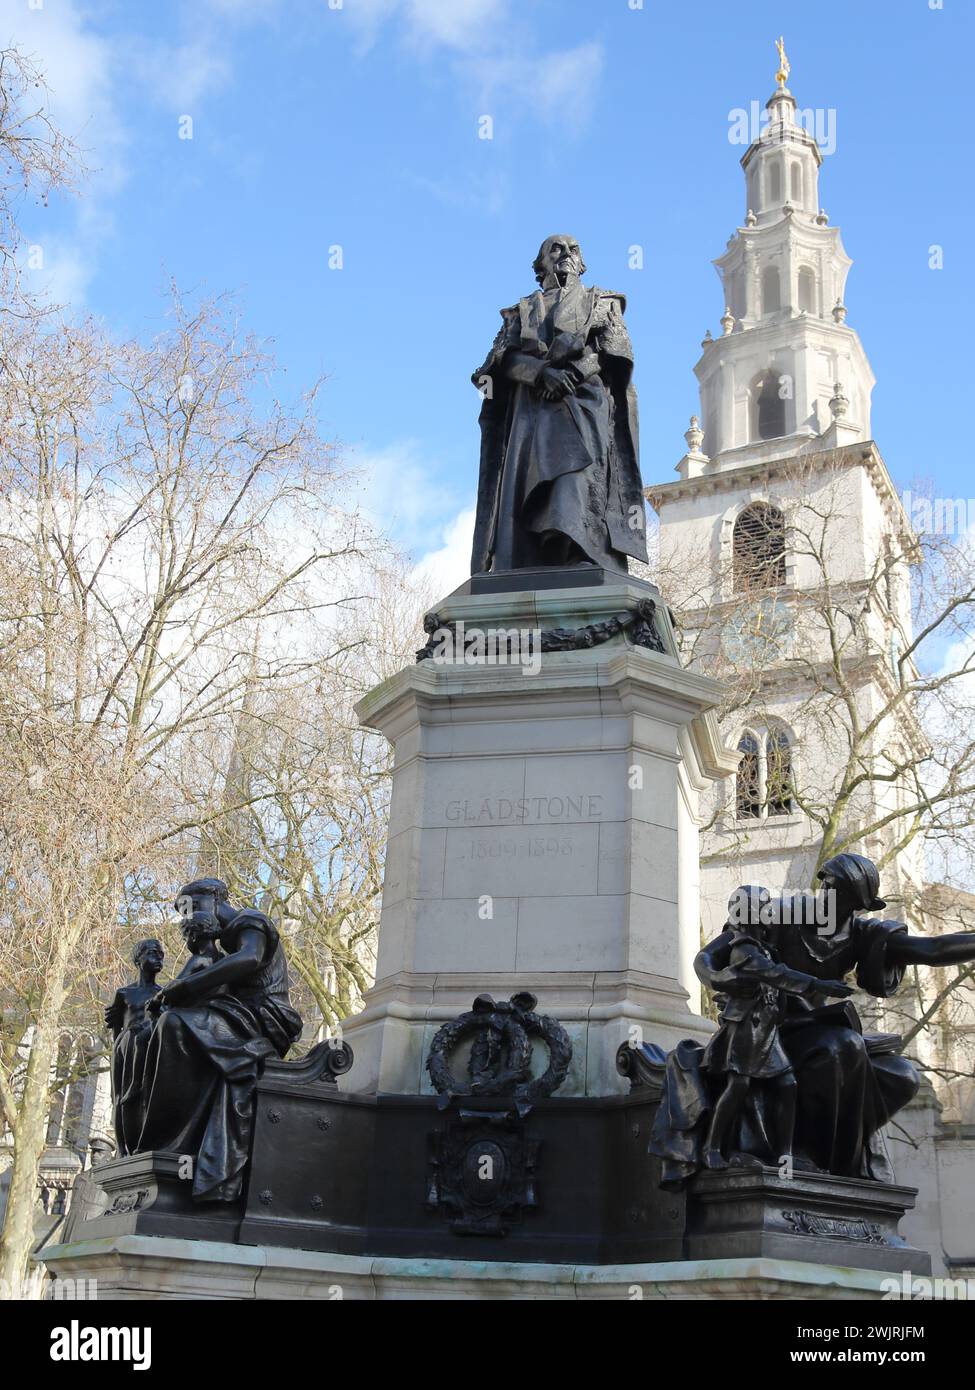 Bronze statue of former British Prime Minister William Gladstone outside St Clement Danes Church at the Strand, London, UK Stock Photo